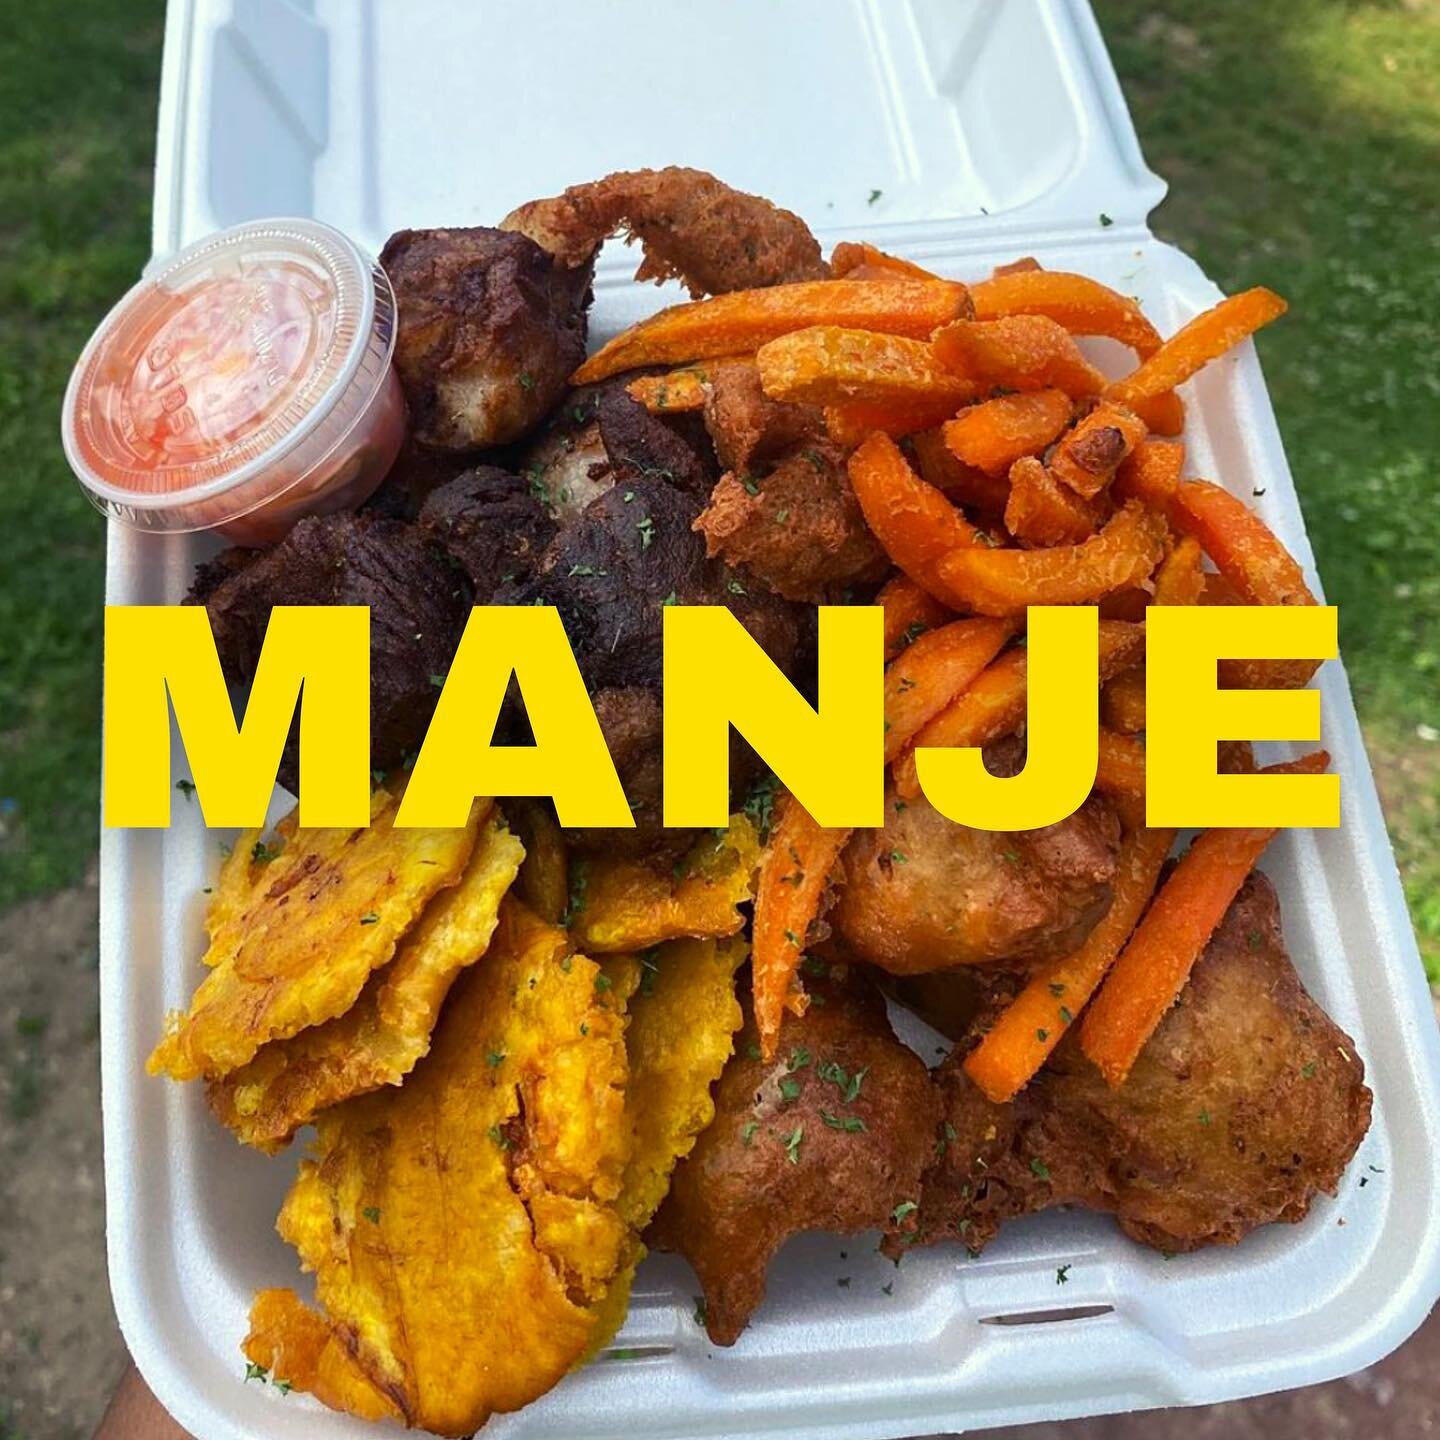 Behold, griot 😋 Haiti's national dish.
⠀
It's deep fried beef or pork served alongside spicy cabbage called pikliz. Like seriosuly if you haven't tried it HAVE YOU LIVED? Kilode??? Grab your Hatian delicacies from our friends at @lakaykreyol and fol